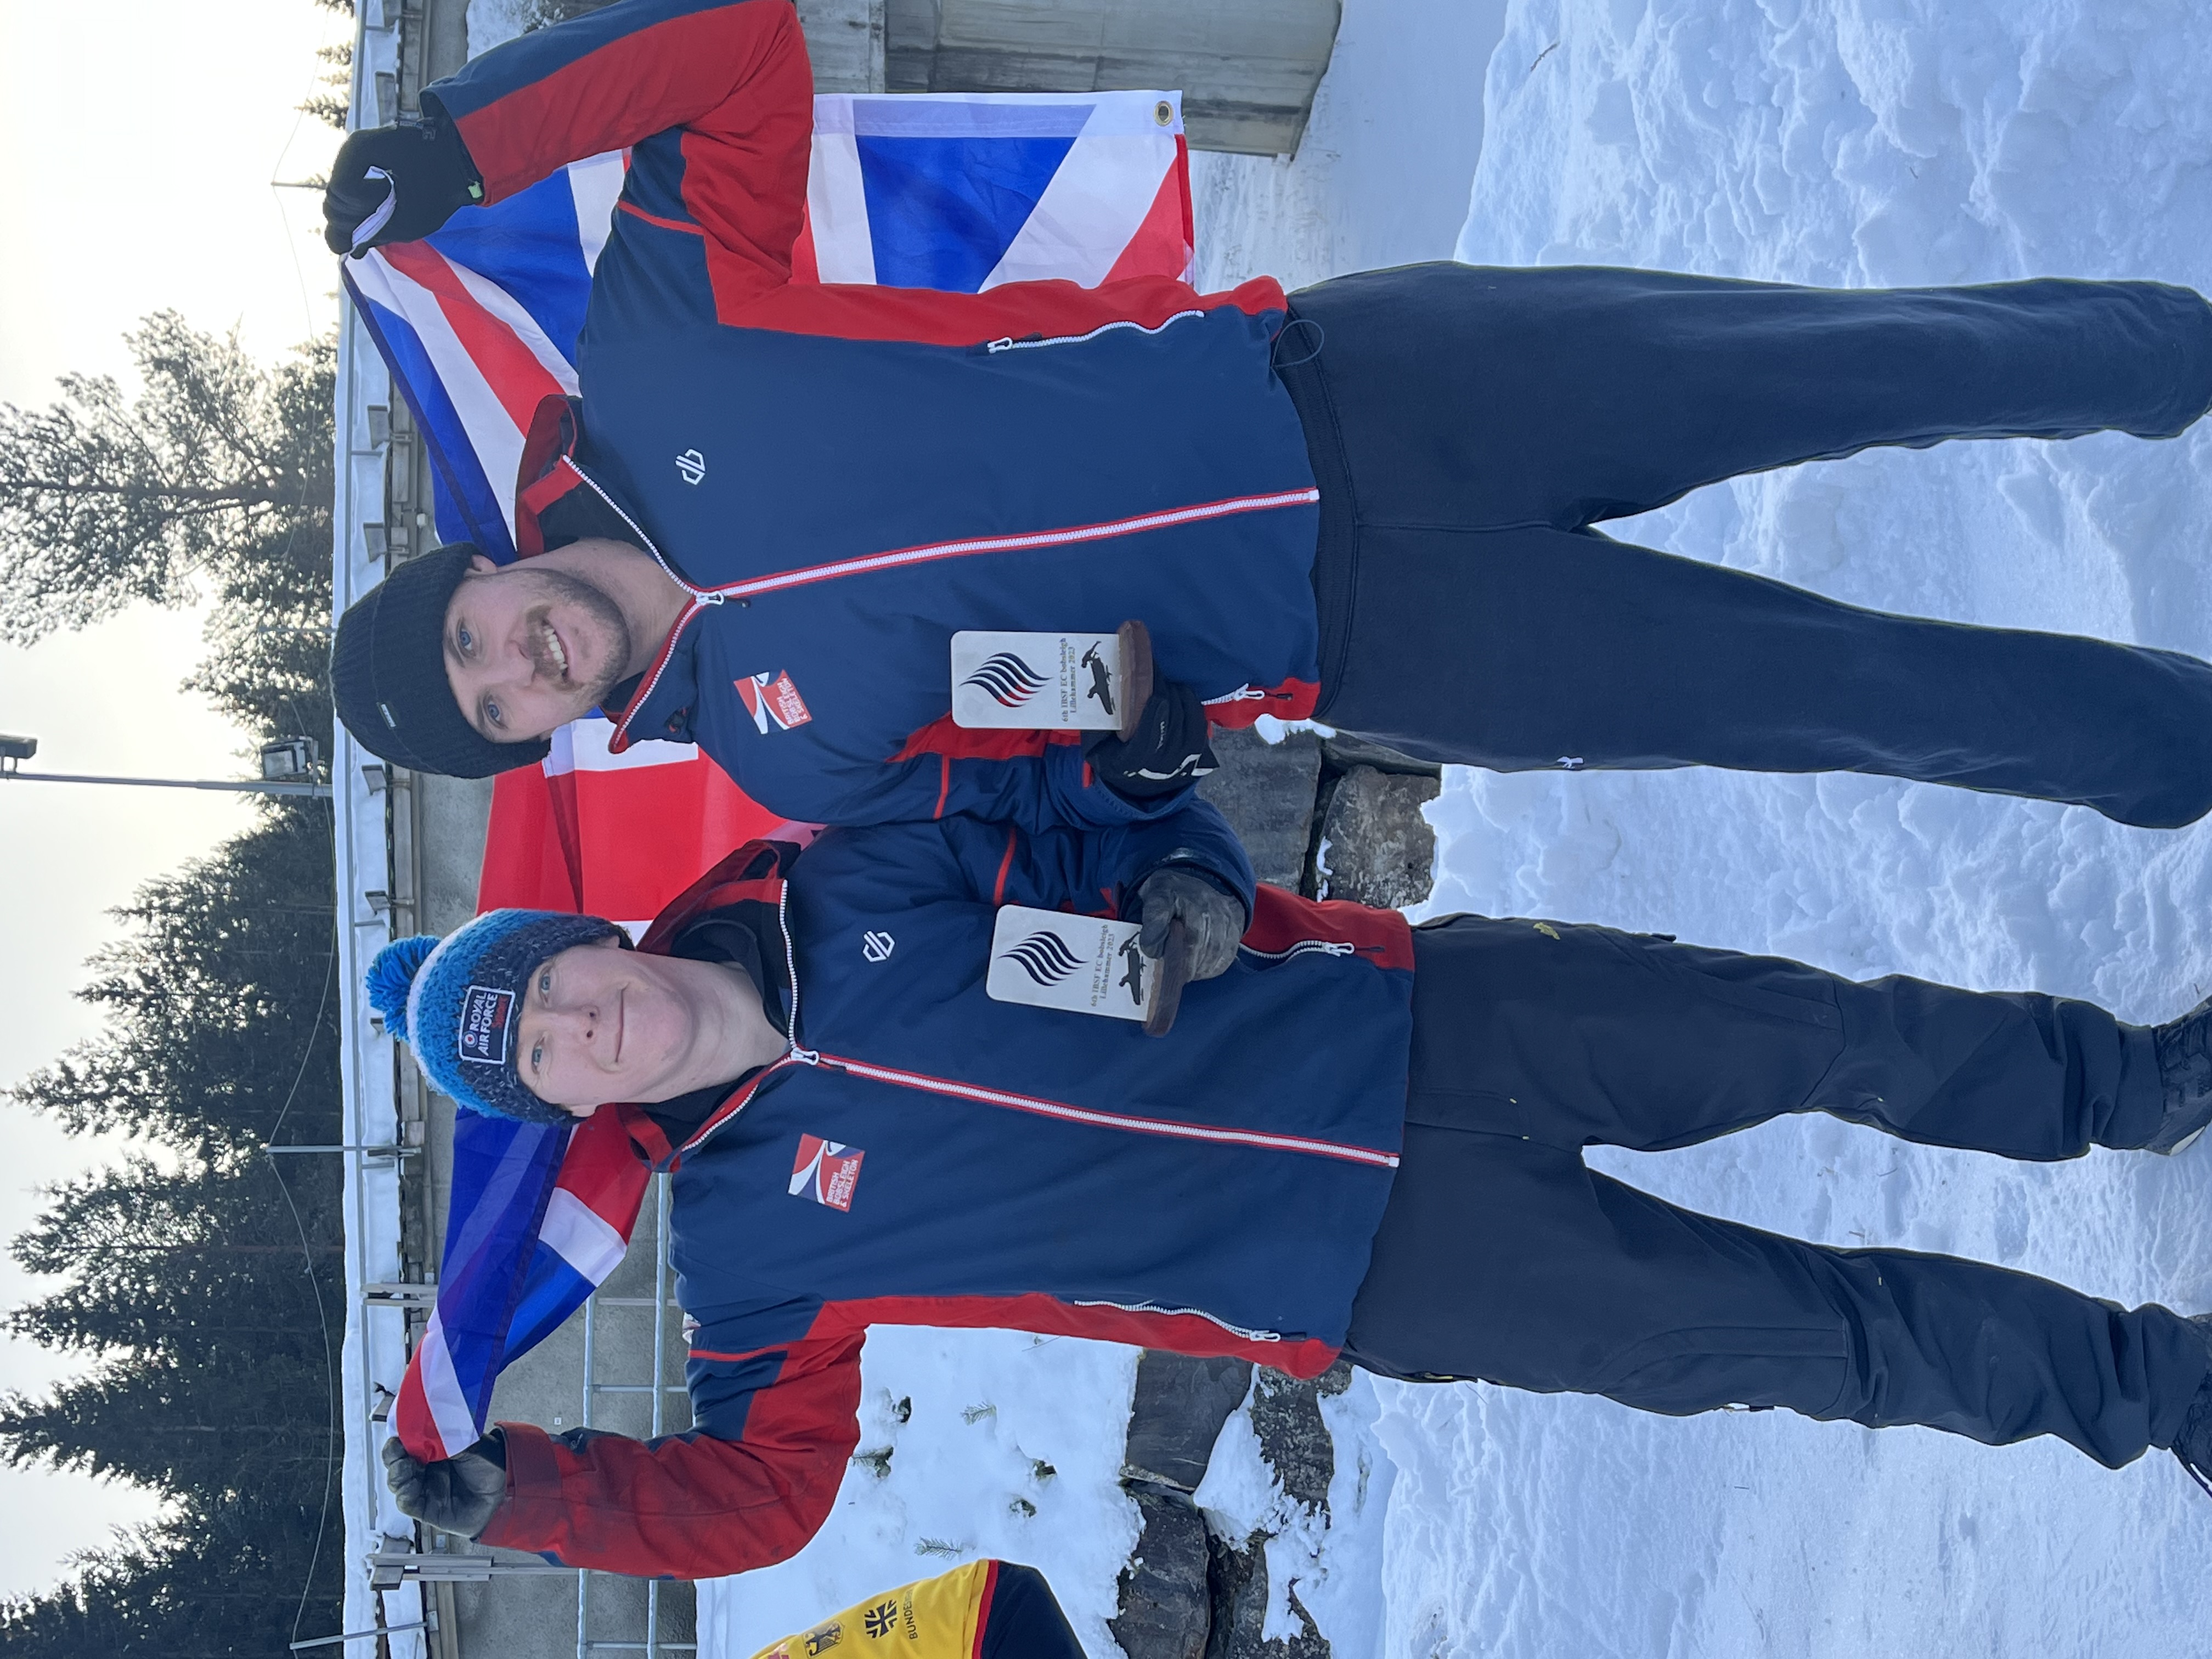 2-man bobsleigh team with Union Jack and trophies